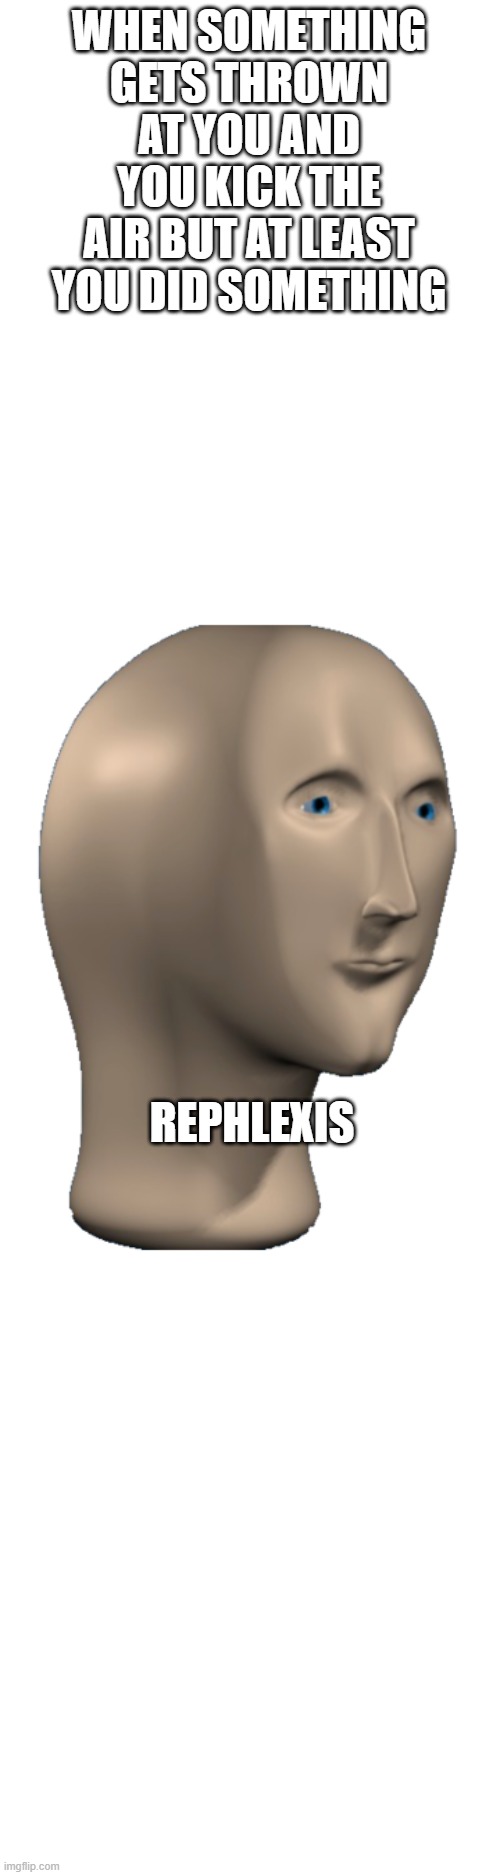 Meme Man |  WHEN SOMETHING GETS THROWN AT YOU AND YOU KICK THE AIR BUT AT LEAST YOU DID SOMETHING; REPHLEXIS | image tagged in meme man | made w/ Imgflip meme maker